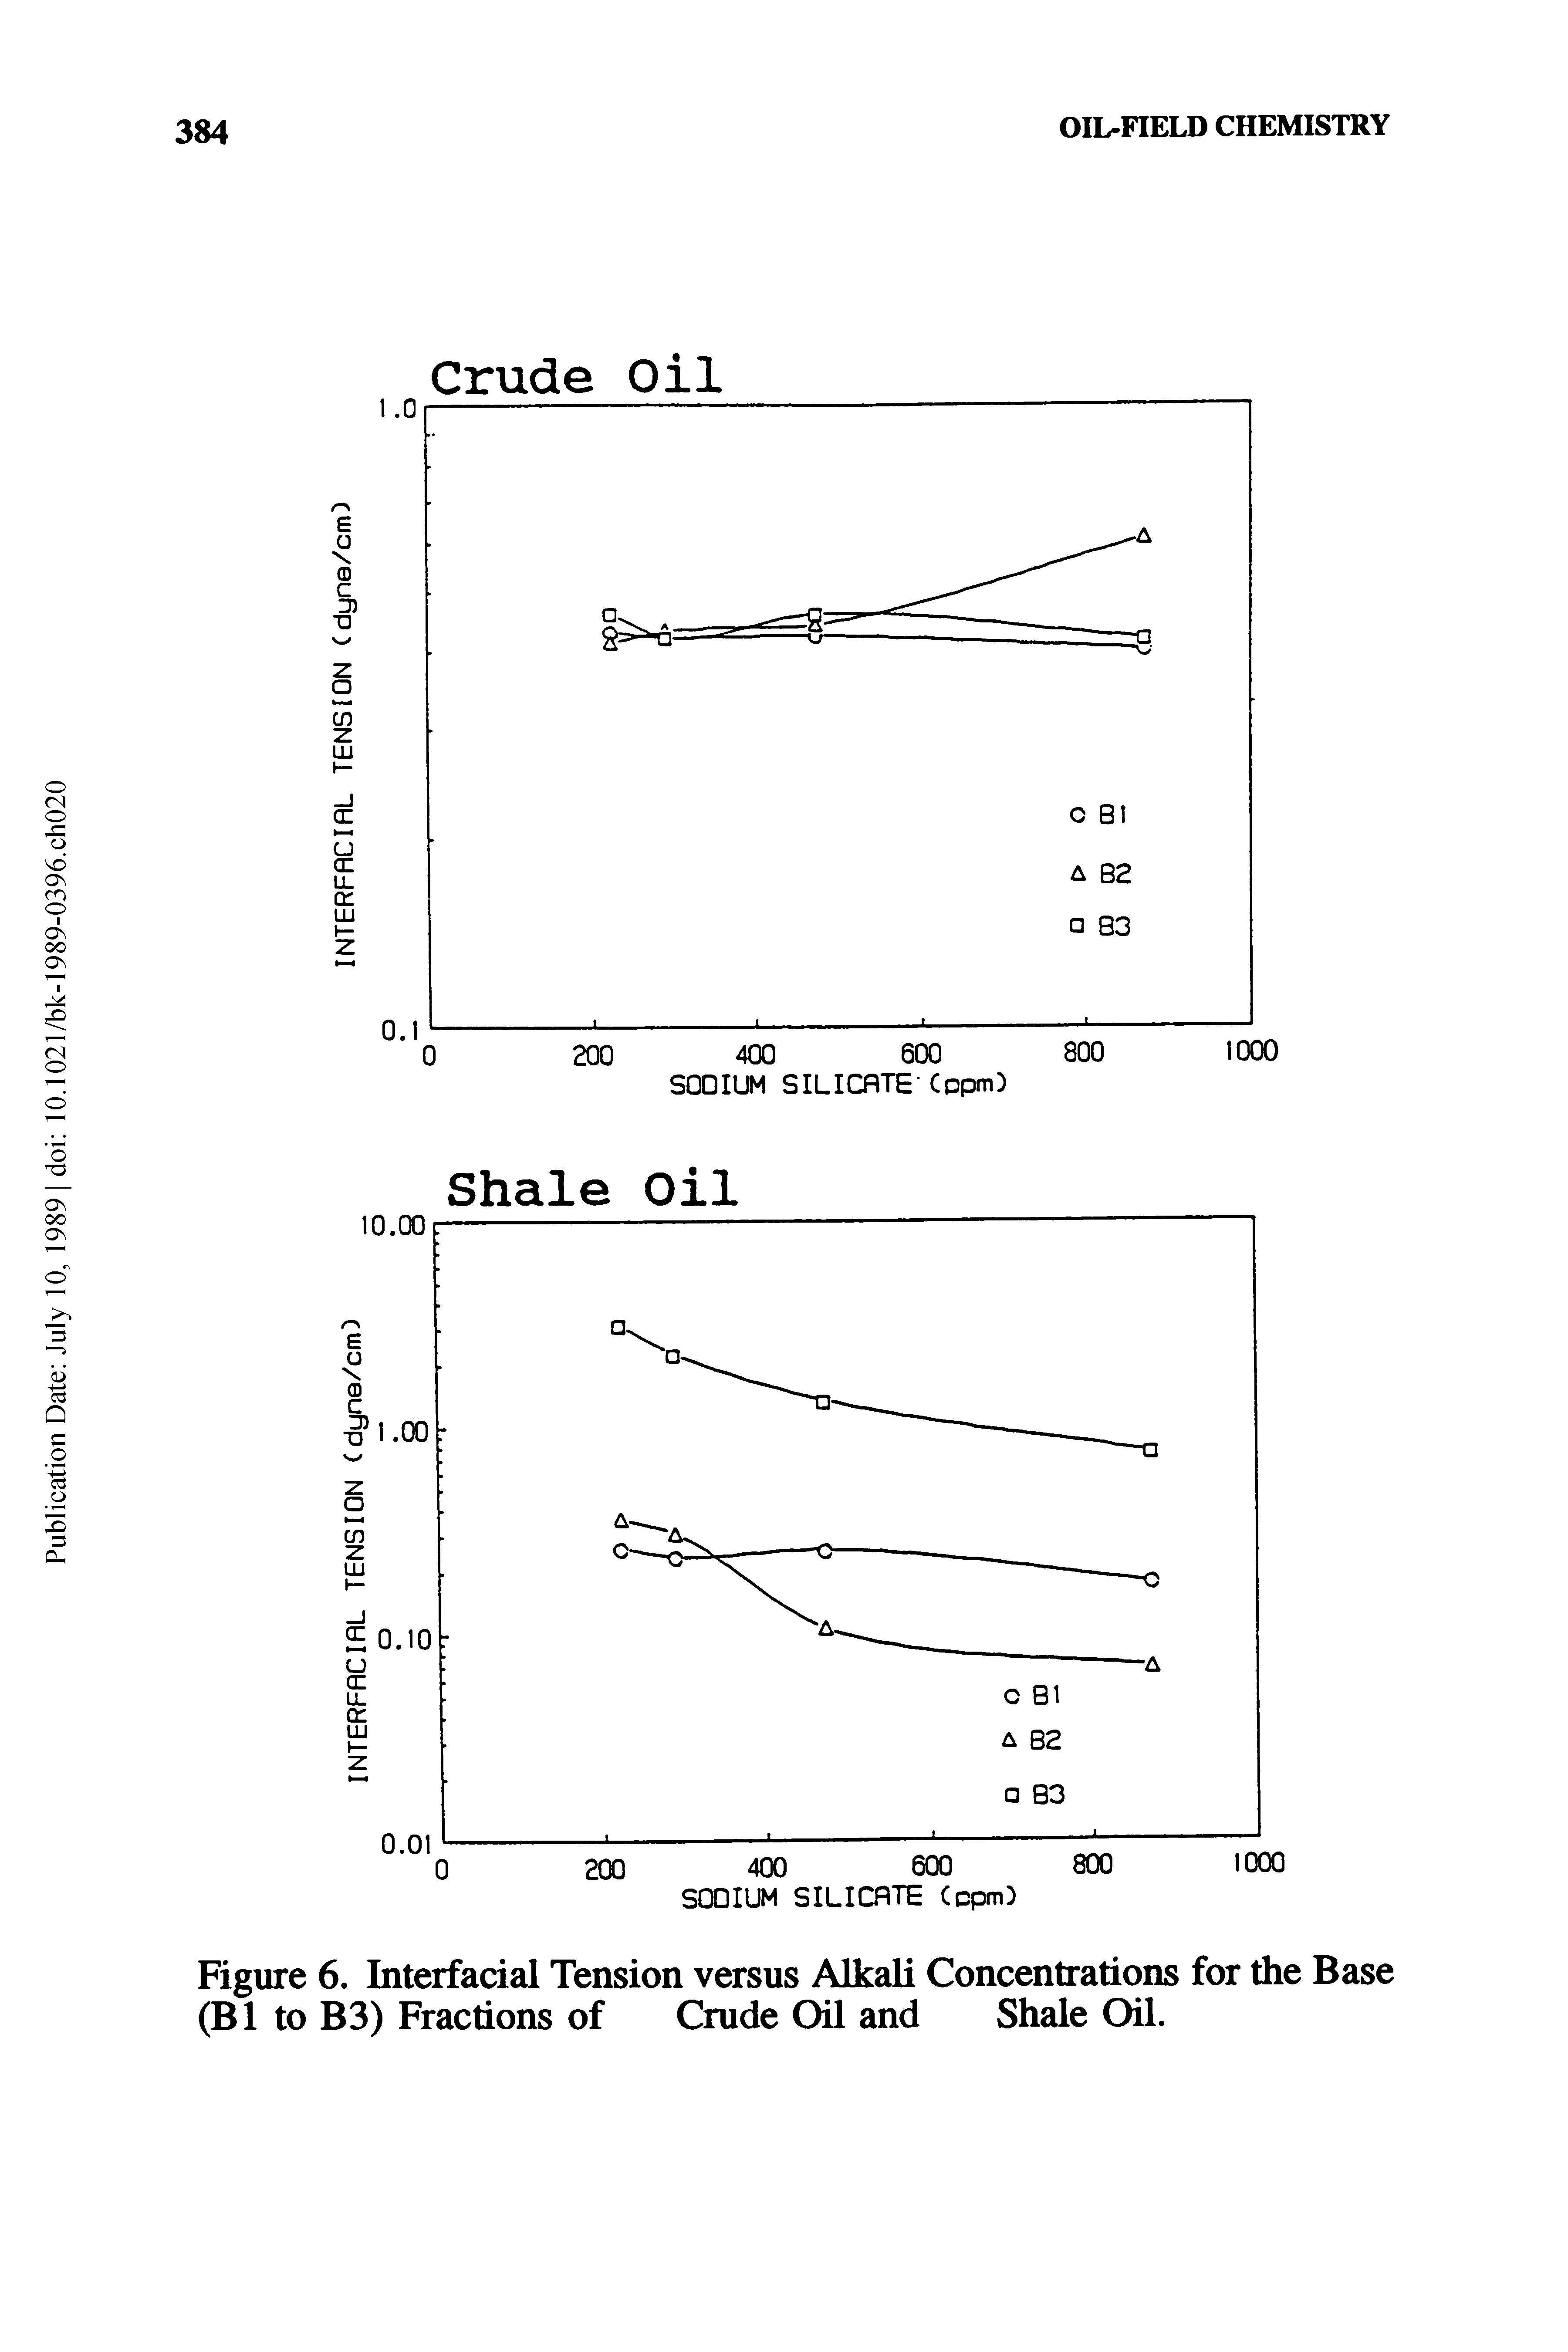 Figure 6. Interfacial Tension versus Alkali Concentrations for the Base (B1 to B3) Fractions of Crude Oil and Shale Oil.